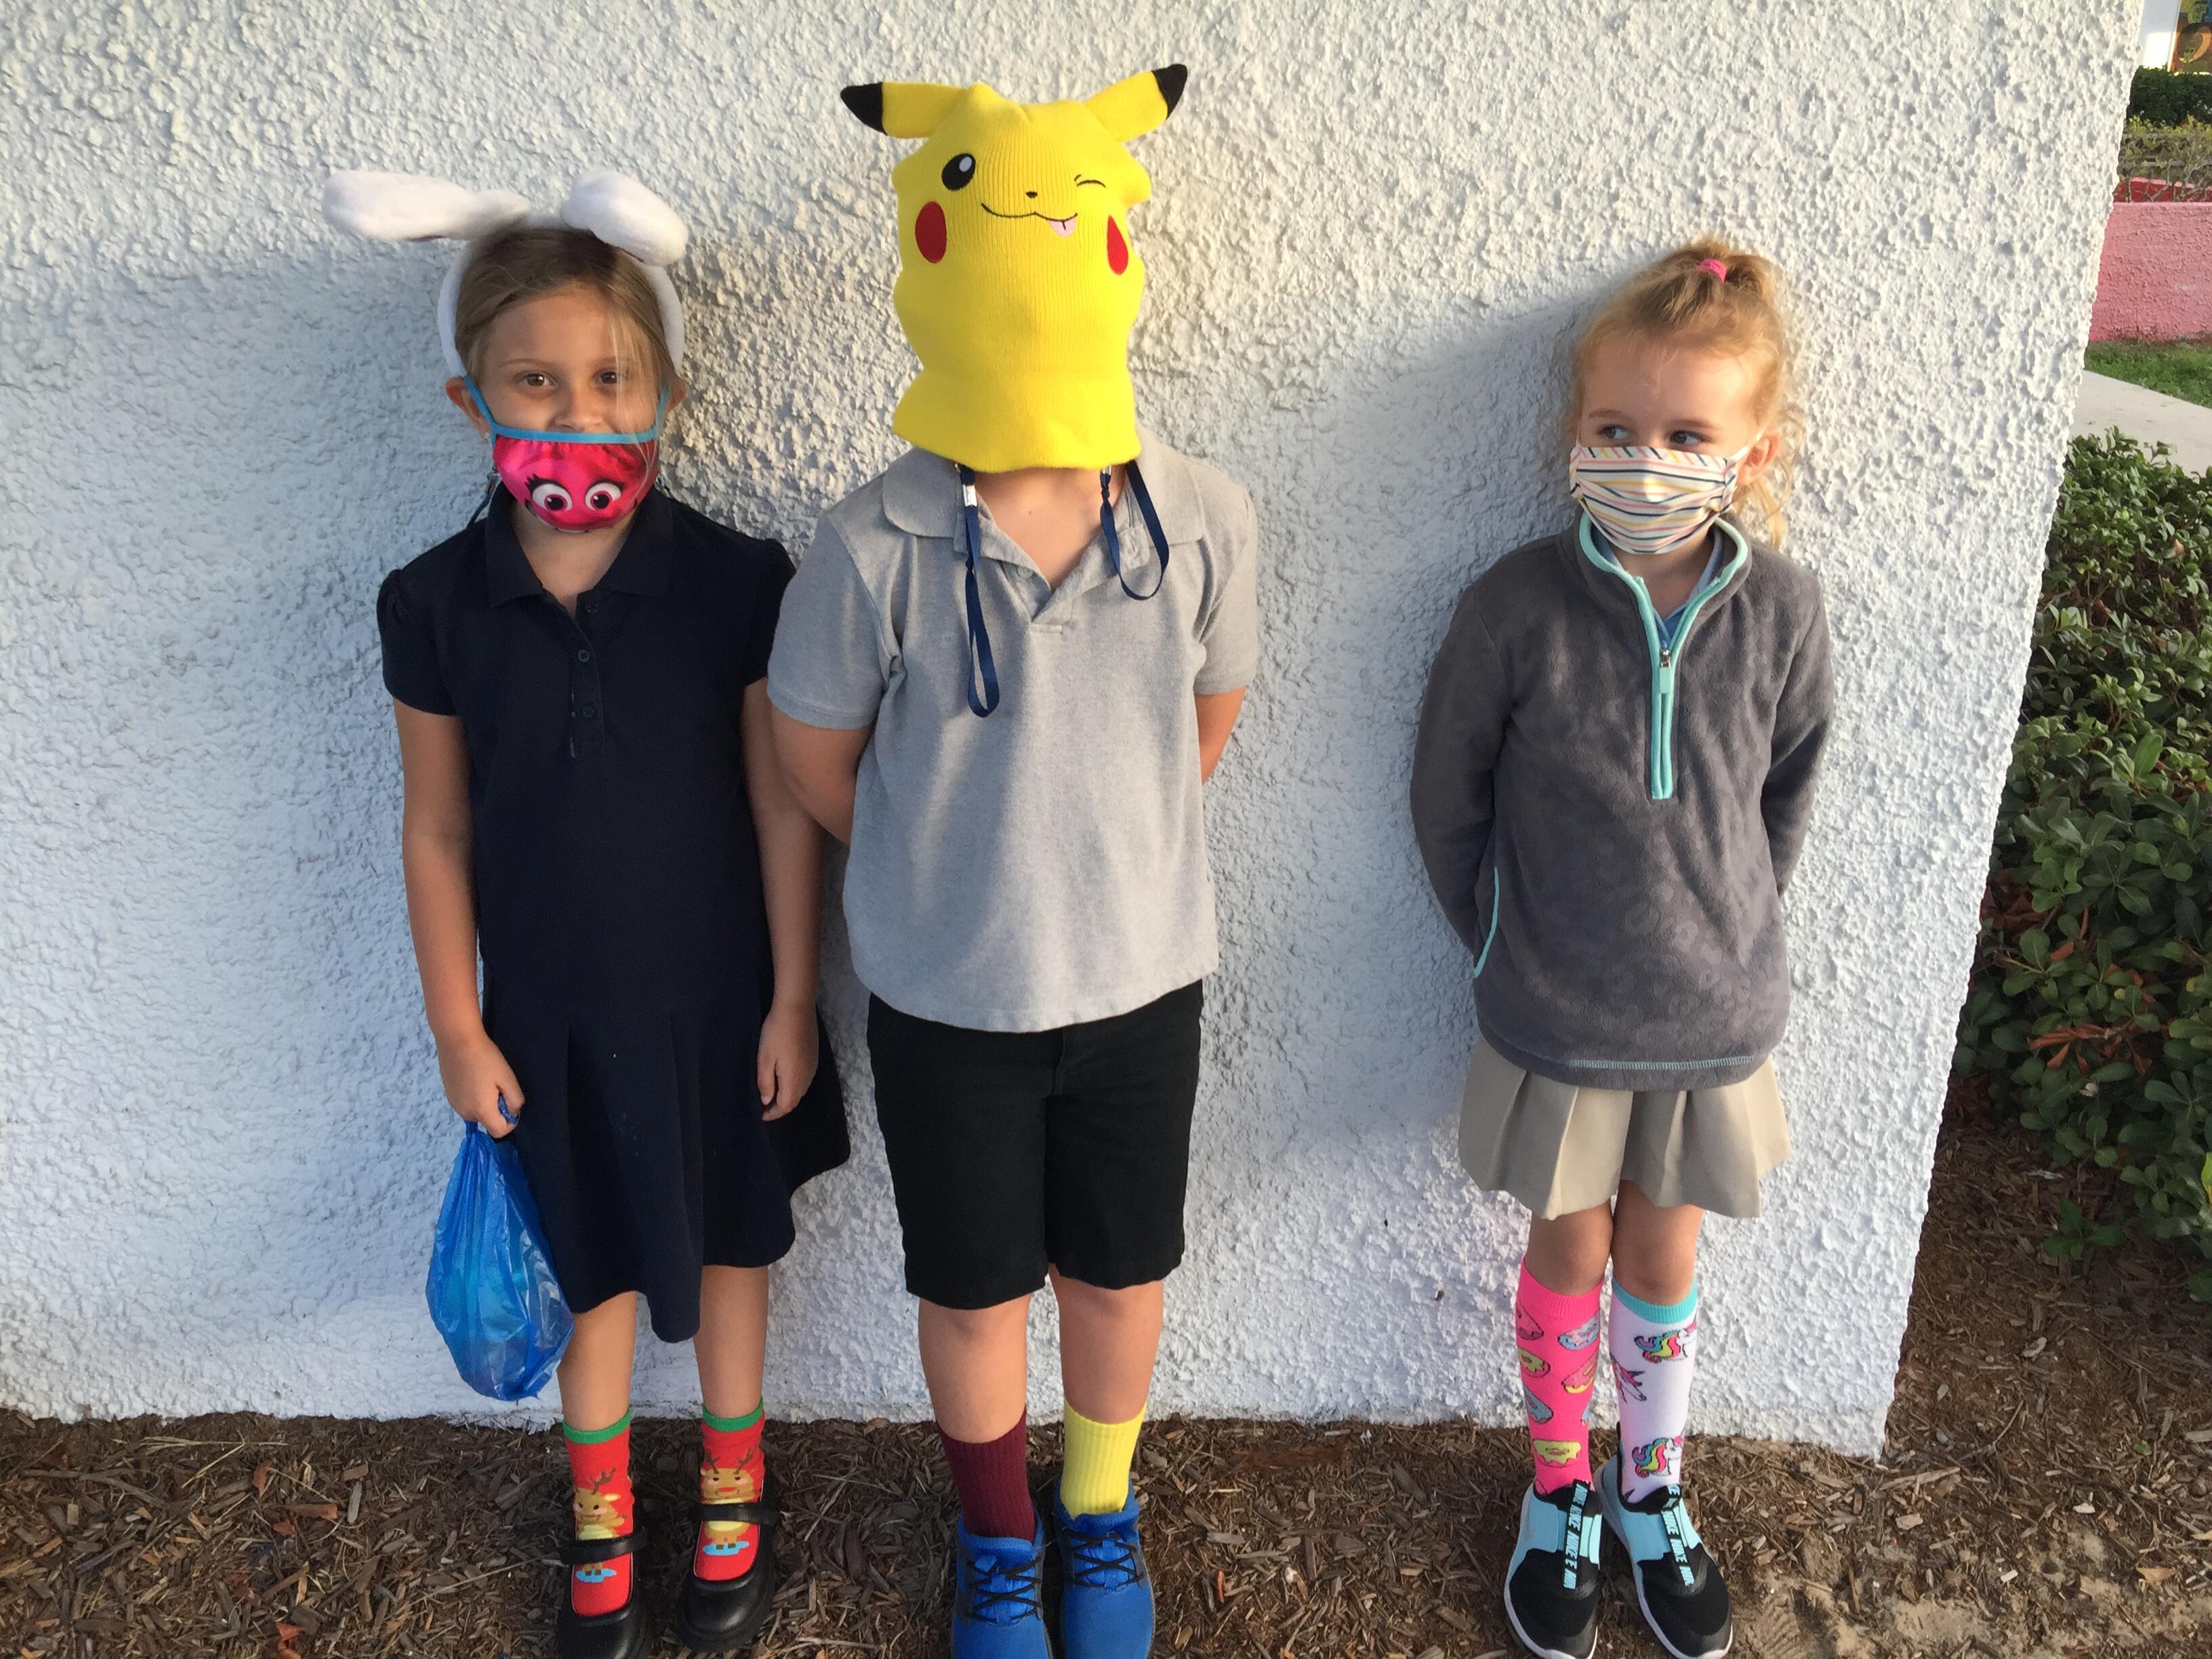 Students wearing Crazy hats and socks 